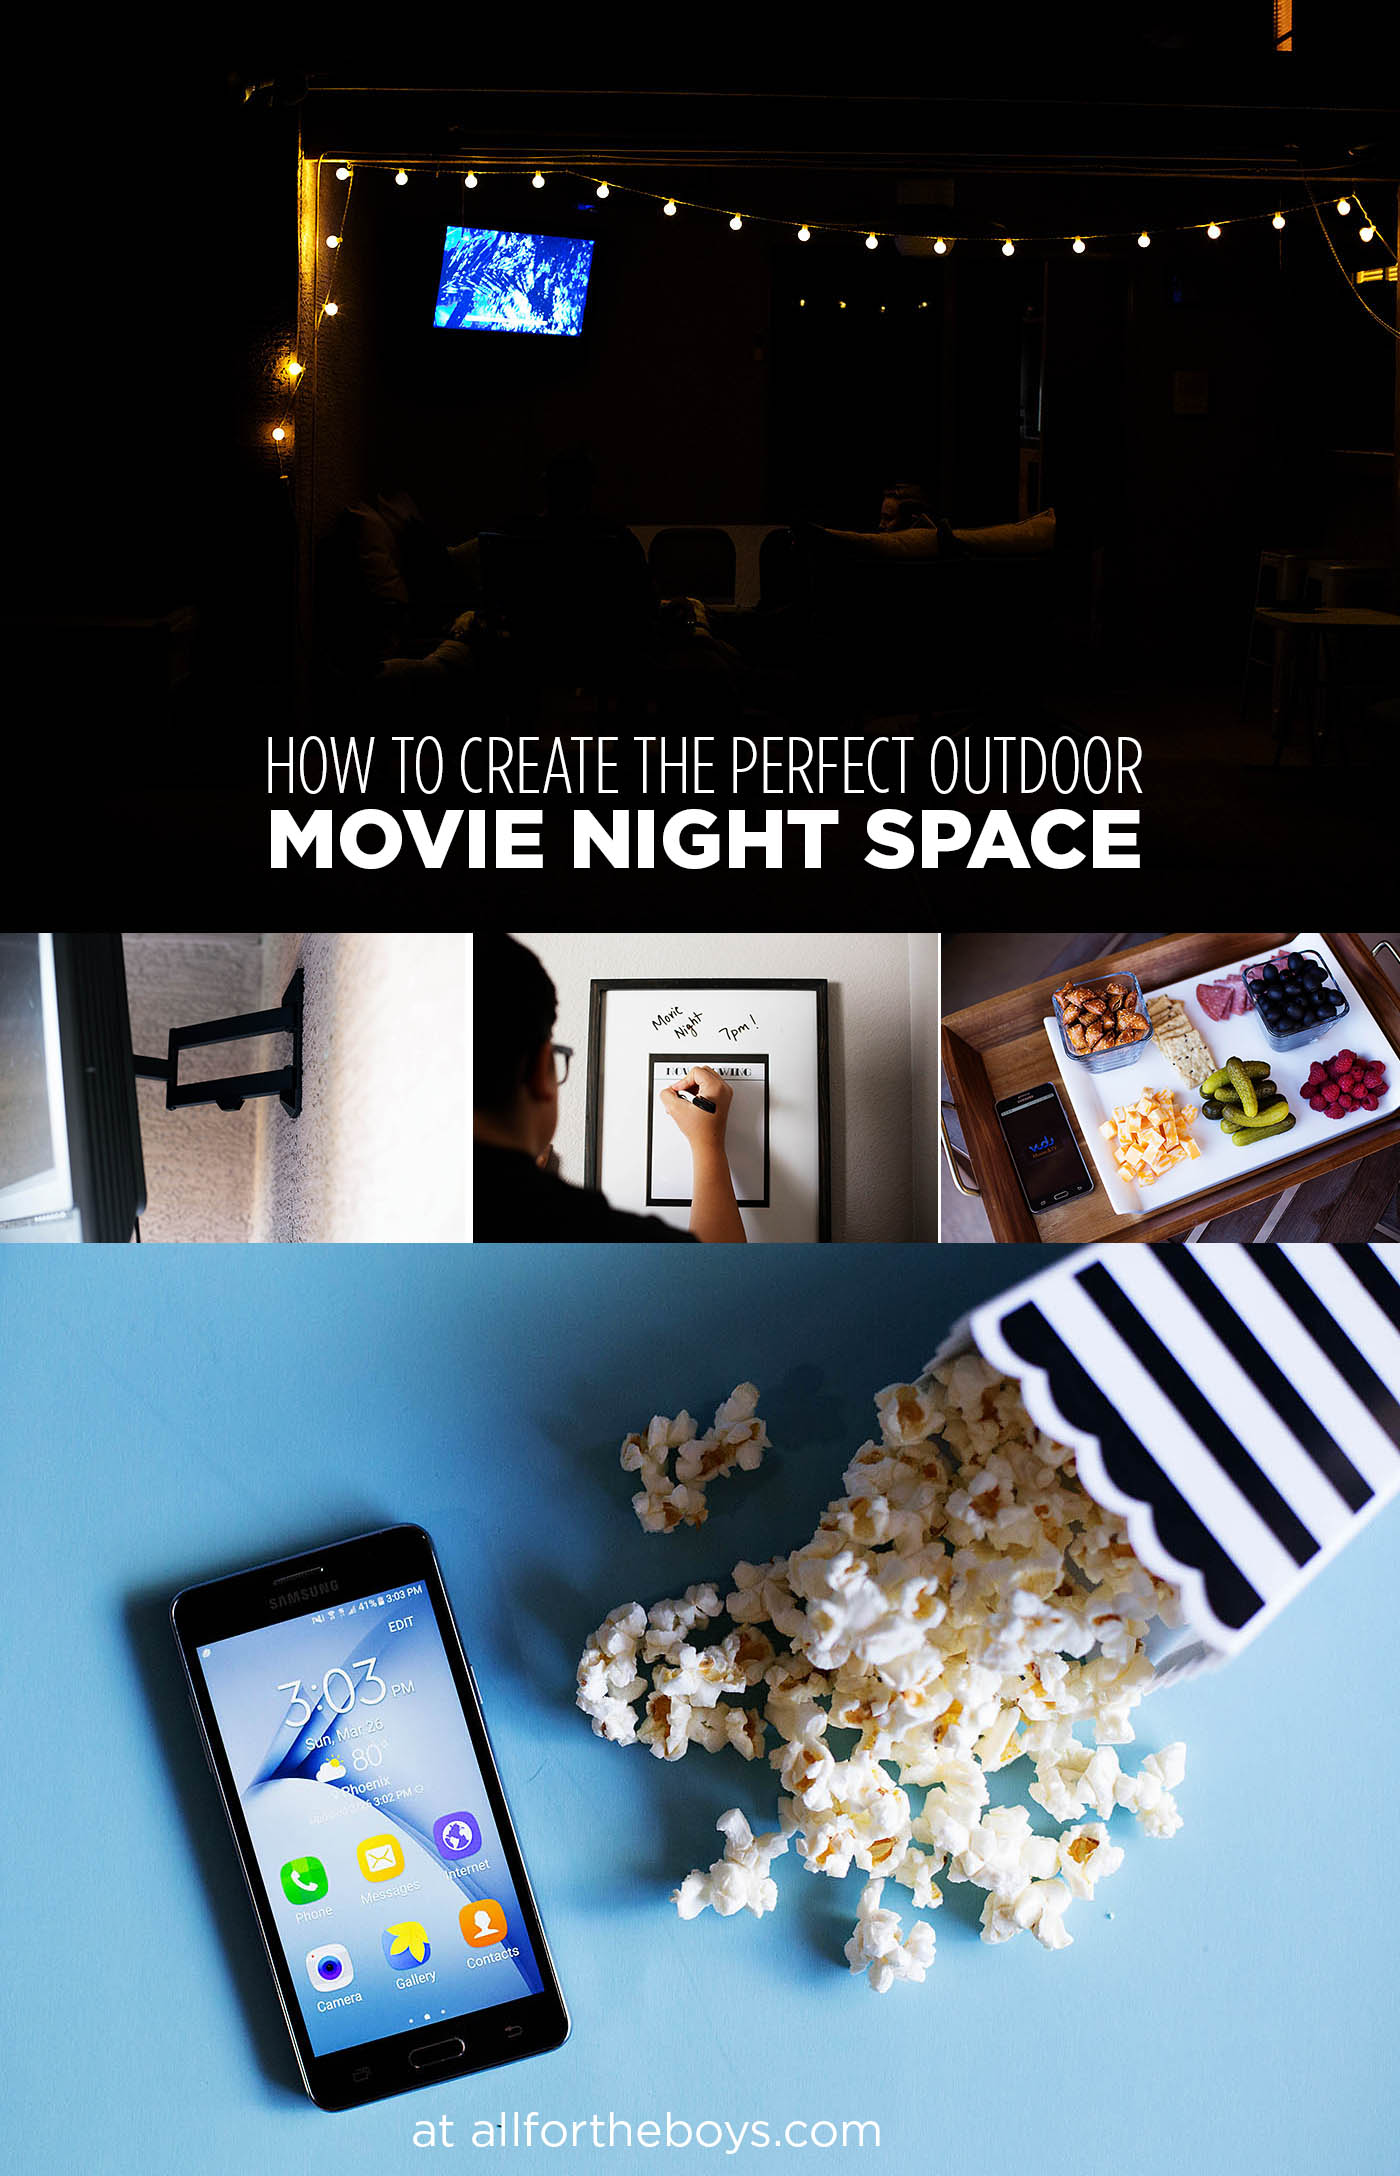 How to create the perfect outdoor movie space on a limited budget